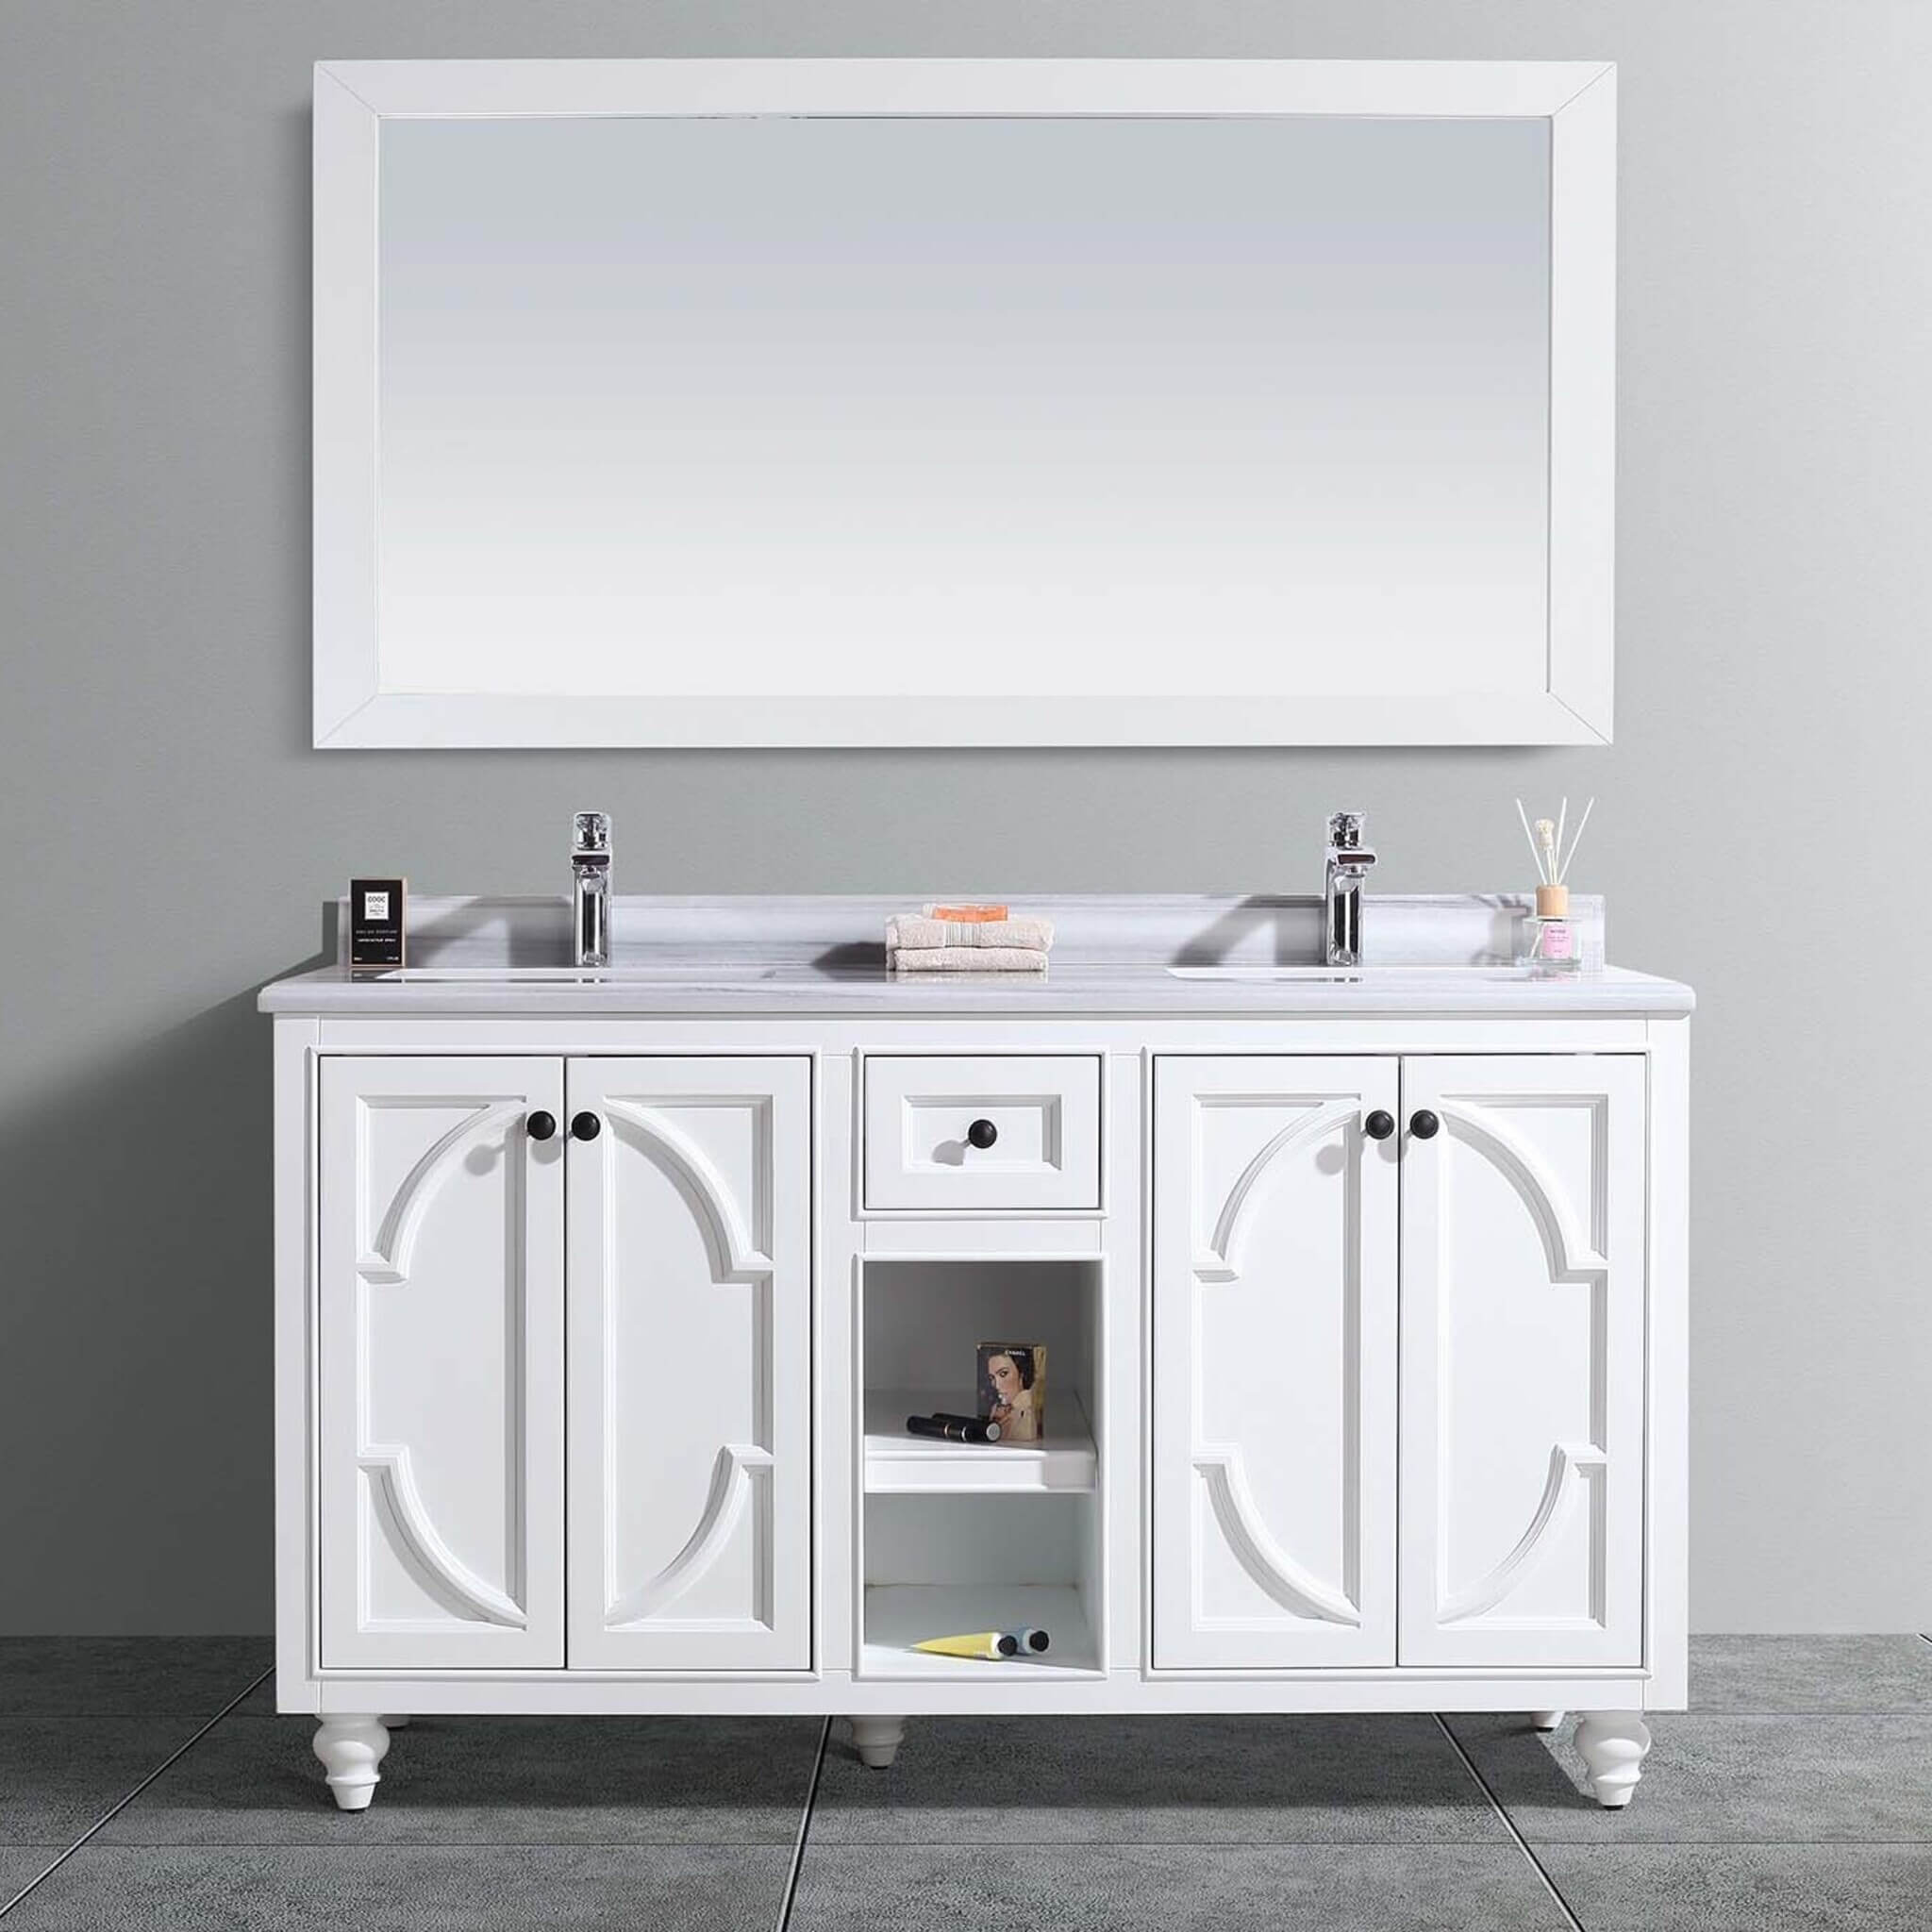 LAVIVA Odyssey 313613-60W-WS 60" Double Bathroom Vanity in White with White Stripes Marble, White Rectangle Sinks, Front View